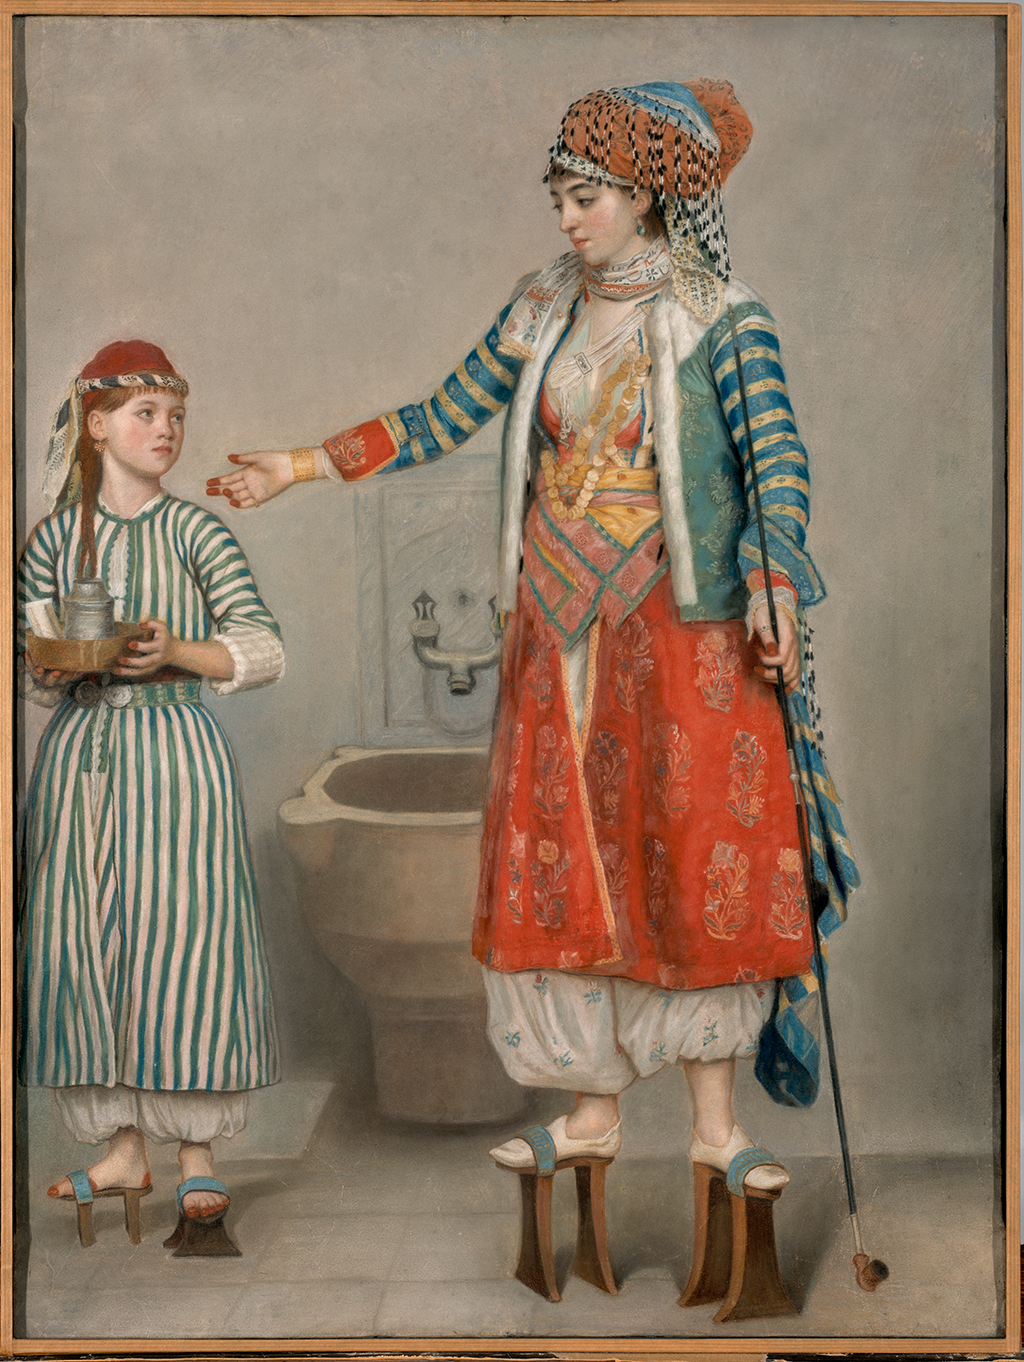 Turkish men and women - NYPL Digital Collections